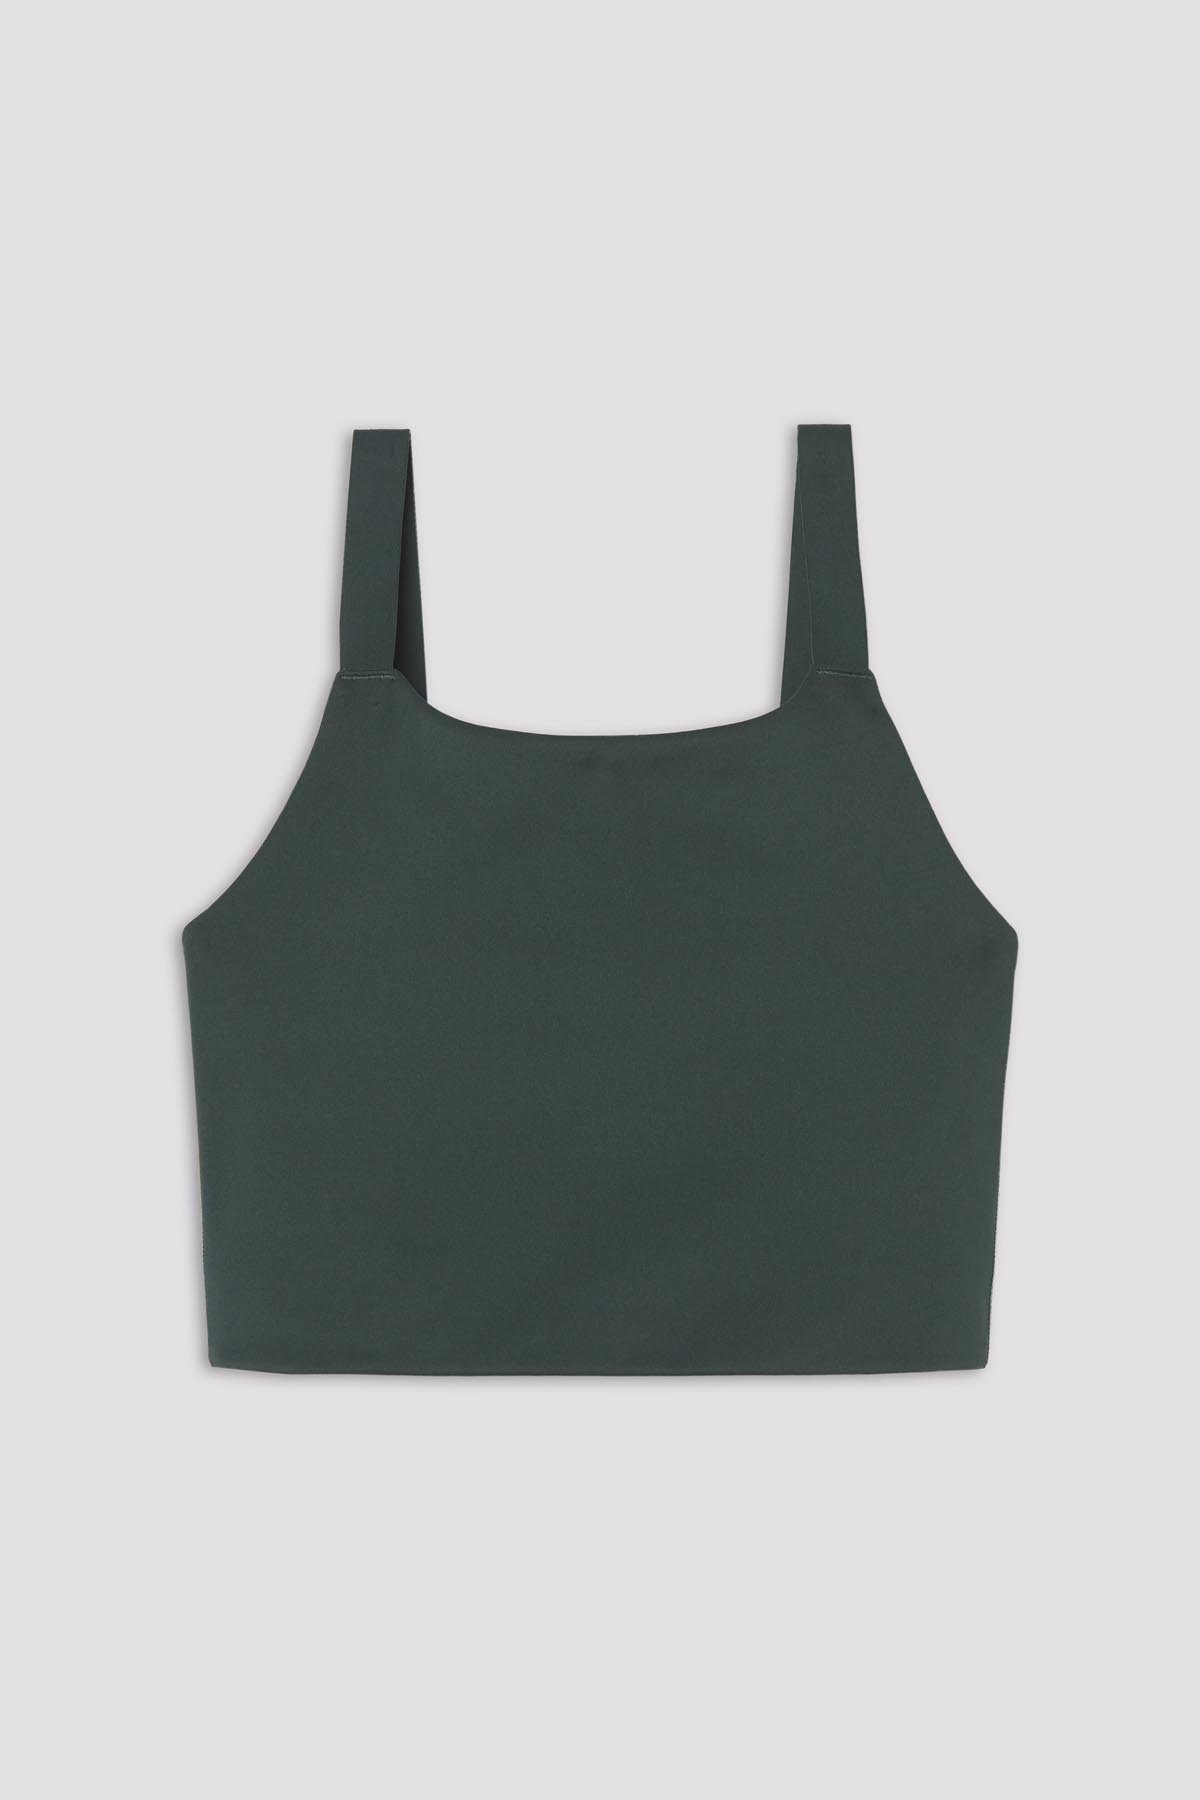 Best compressing bra from Girlfriend Collective to use as binder